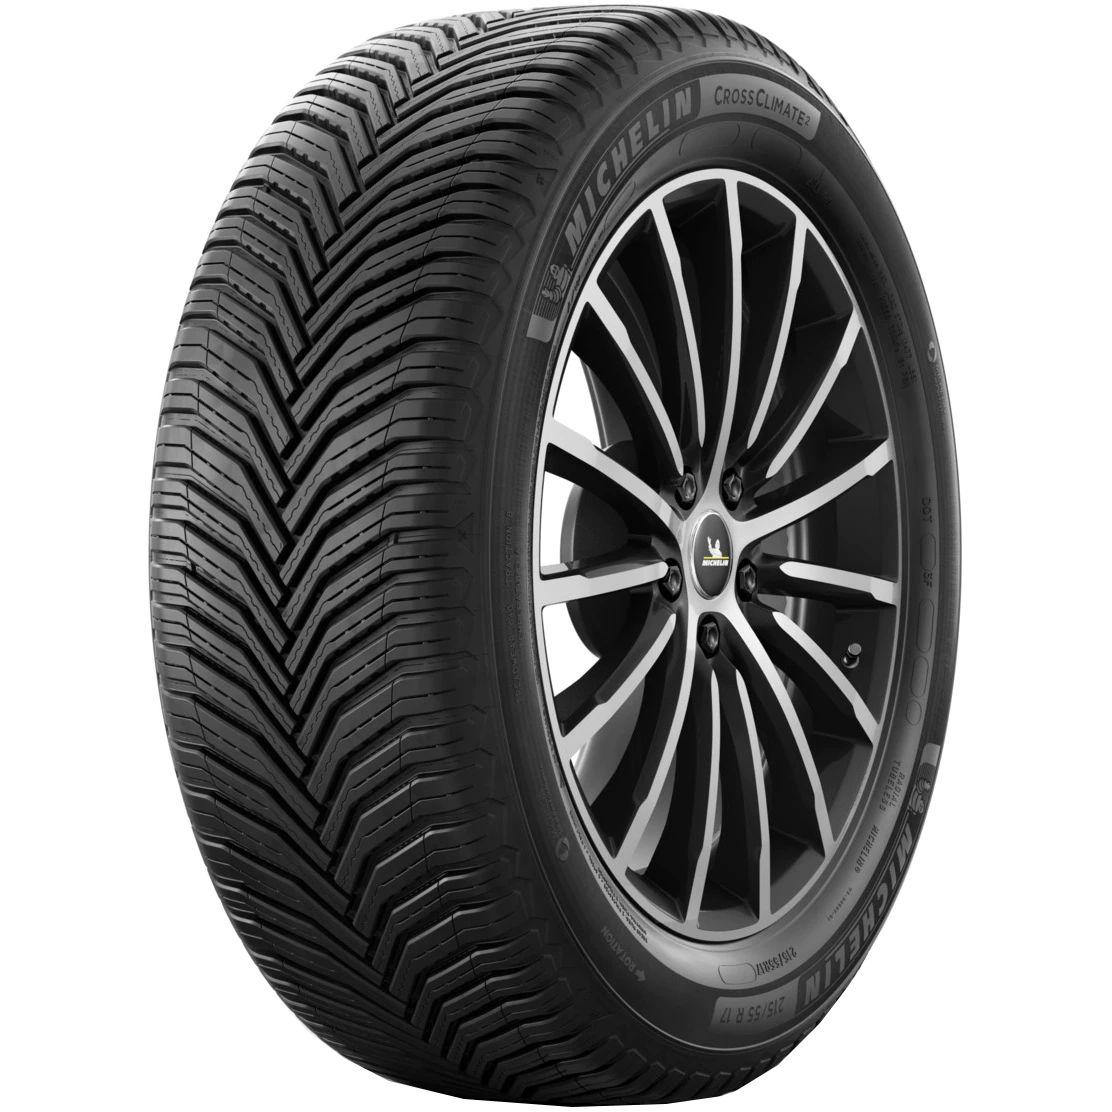 Anvelope all seasons MICHELIN CrossClimate2 M+S XL 235/45 R17 97Y